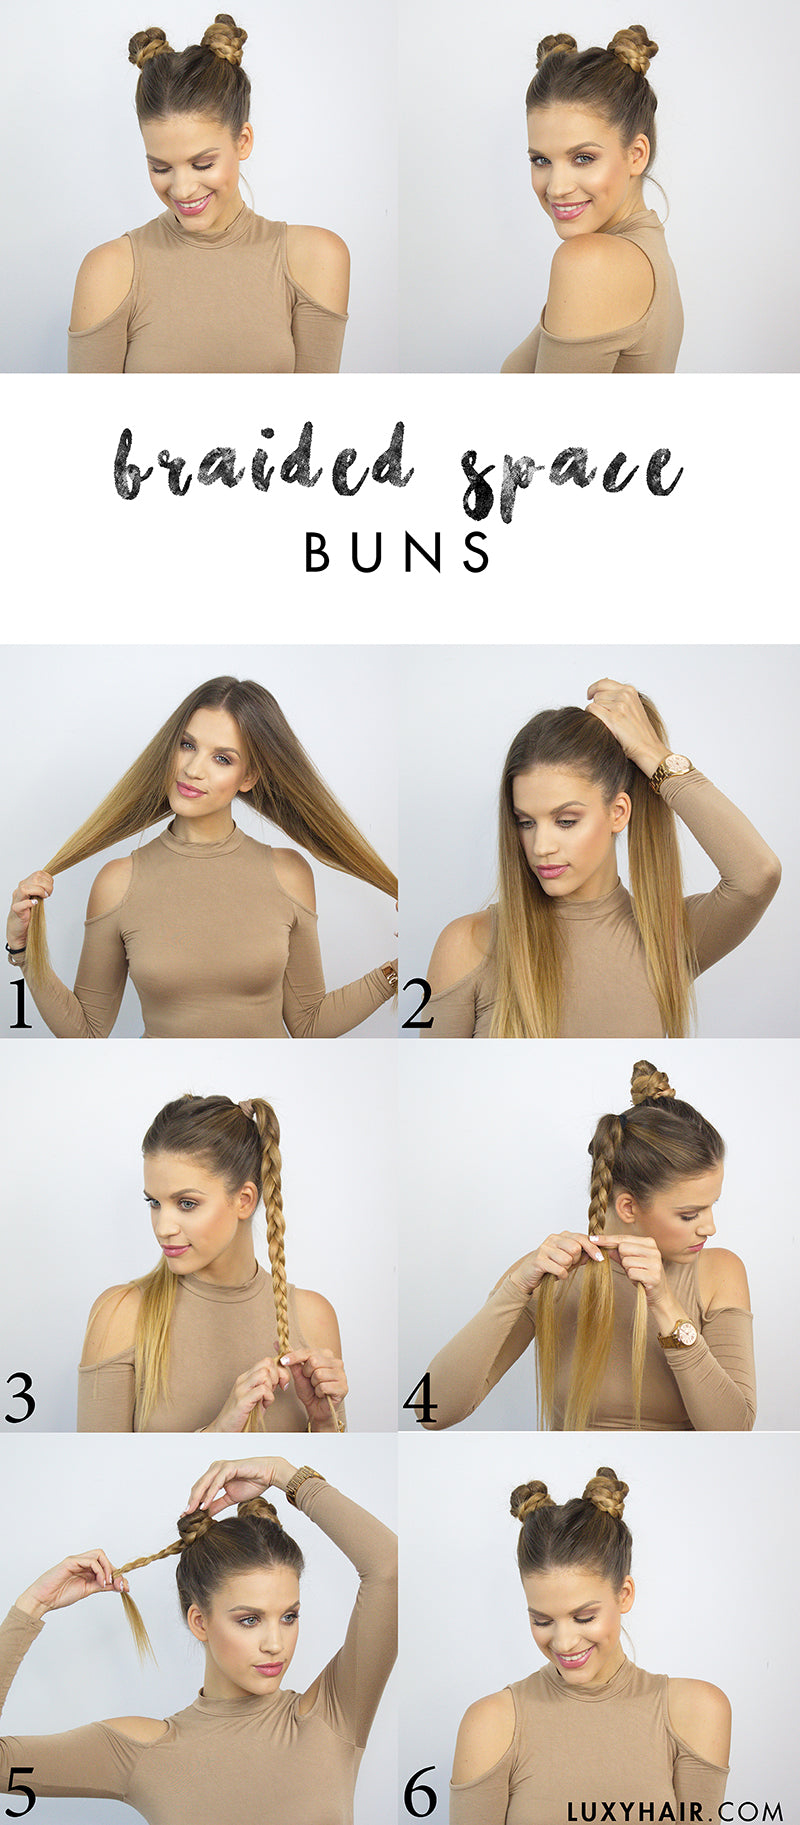 Here's The Fool-Proof Way To Do A Space Buns Hairstyle